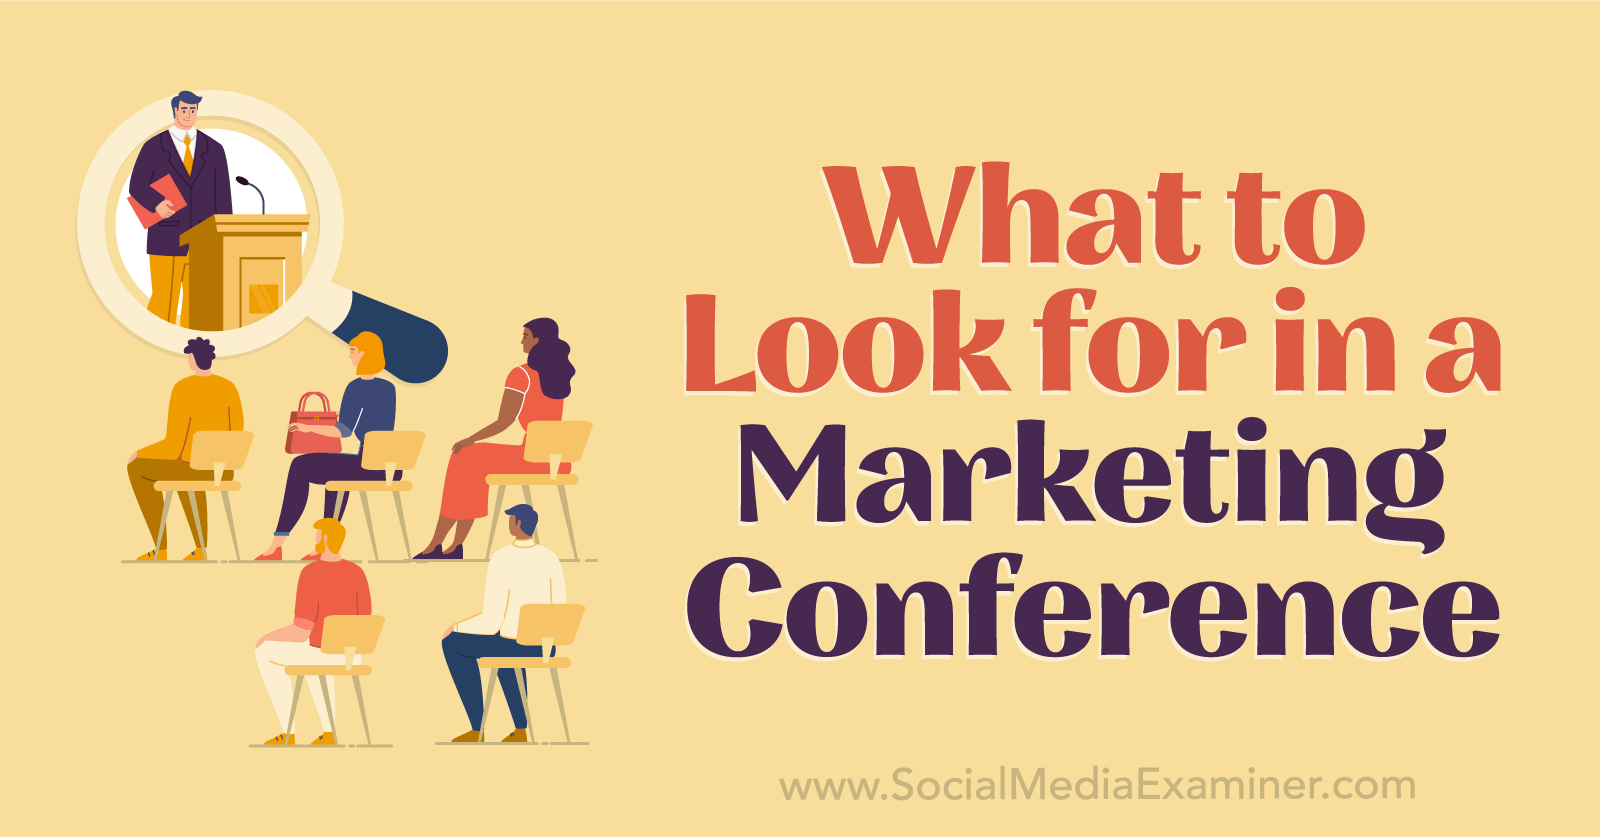 What to Look for in a Marketing Conference-Social Media Examiner